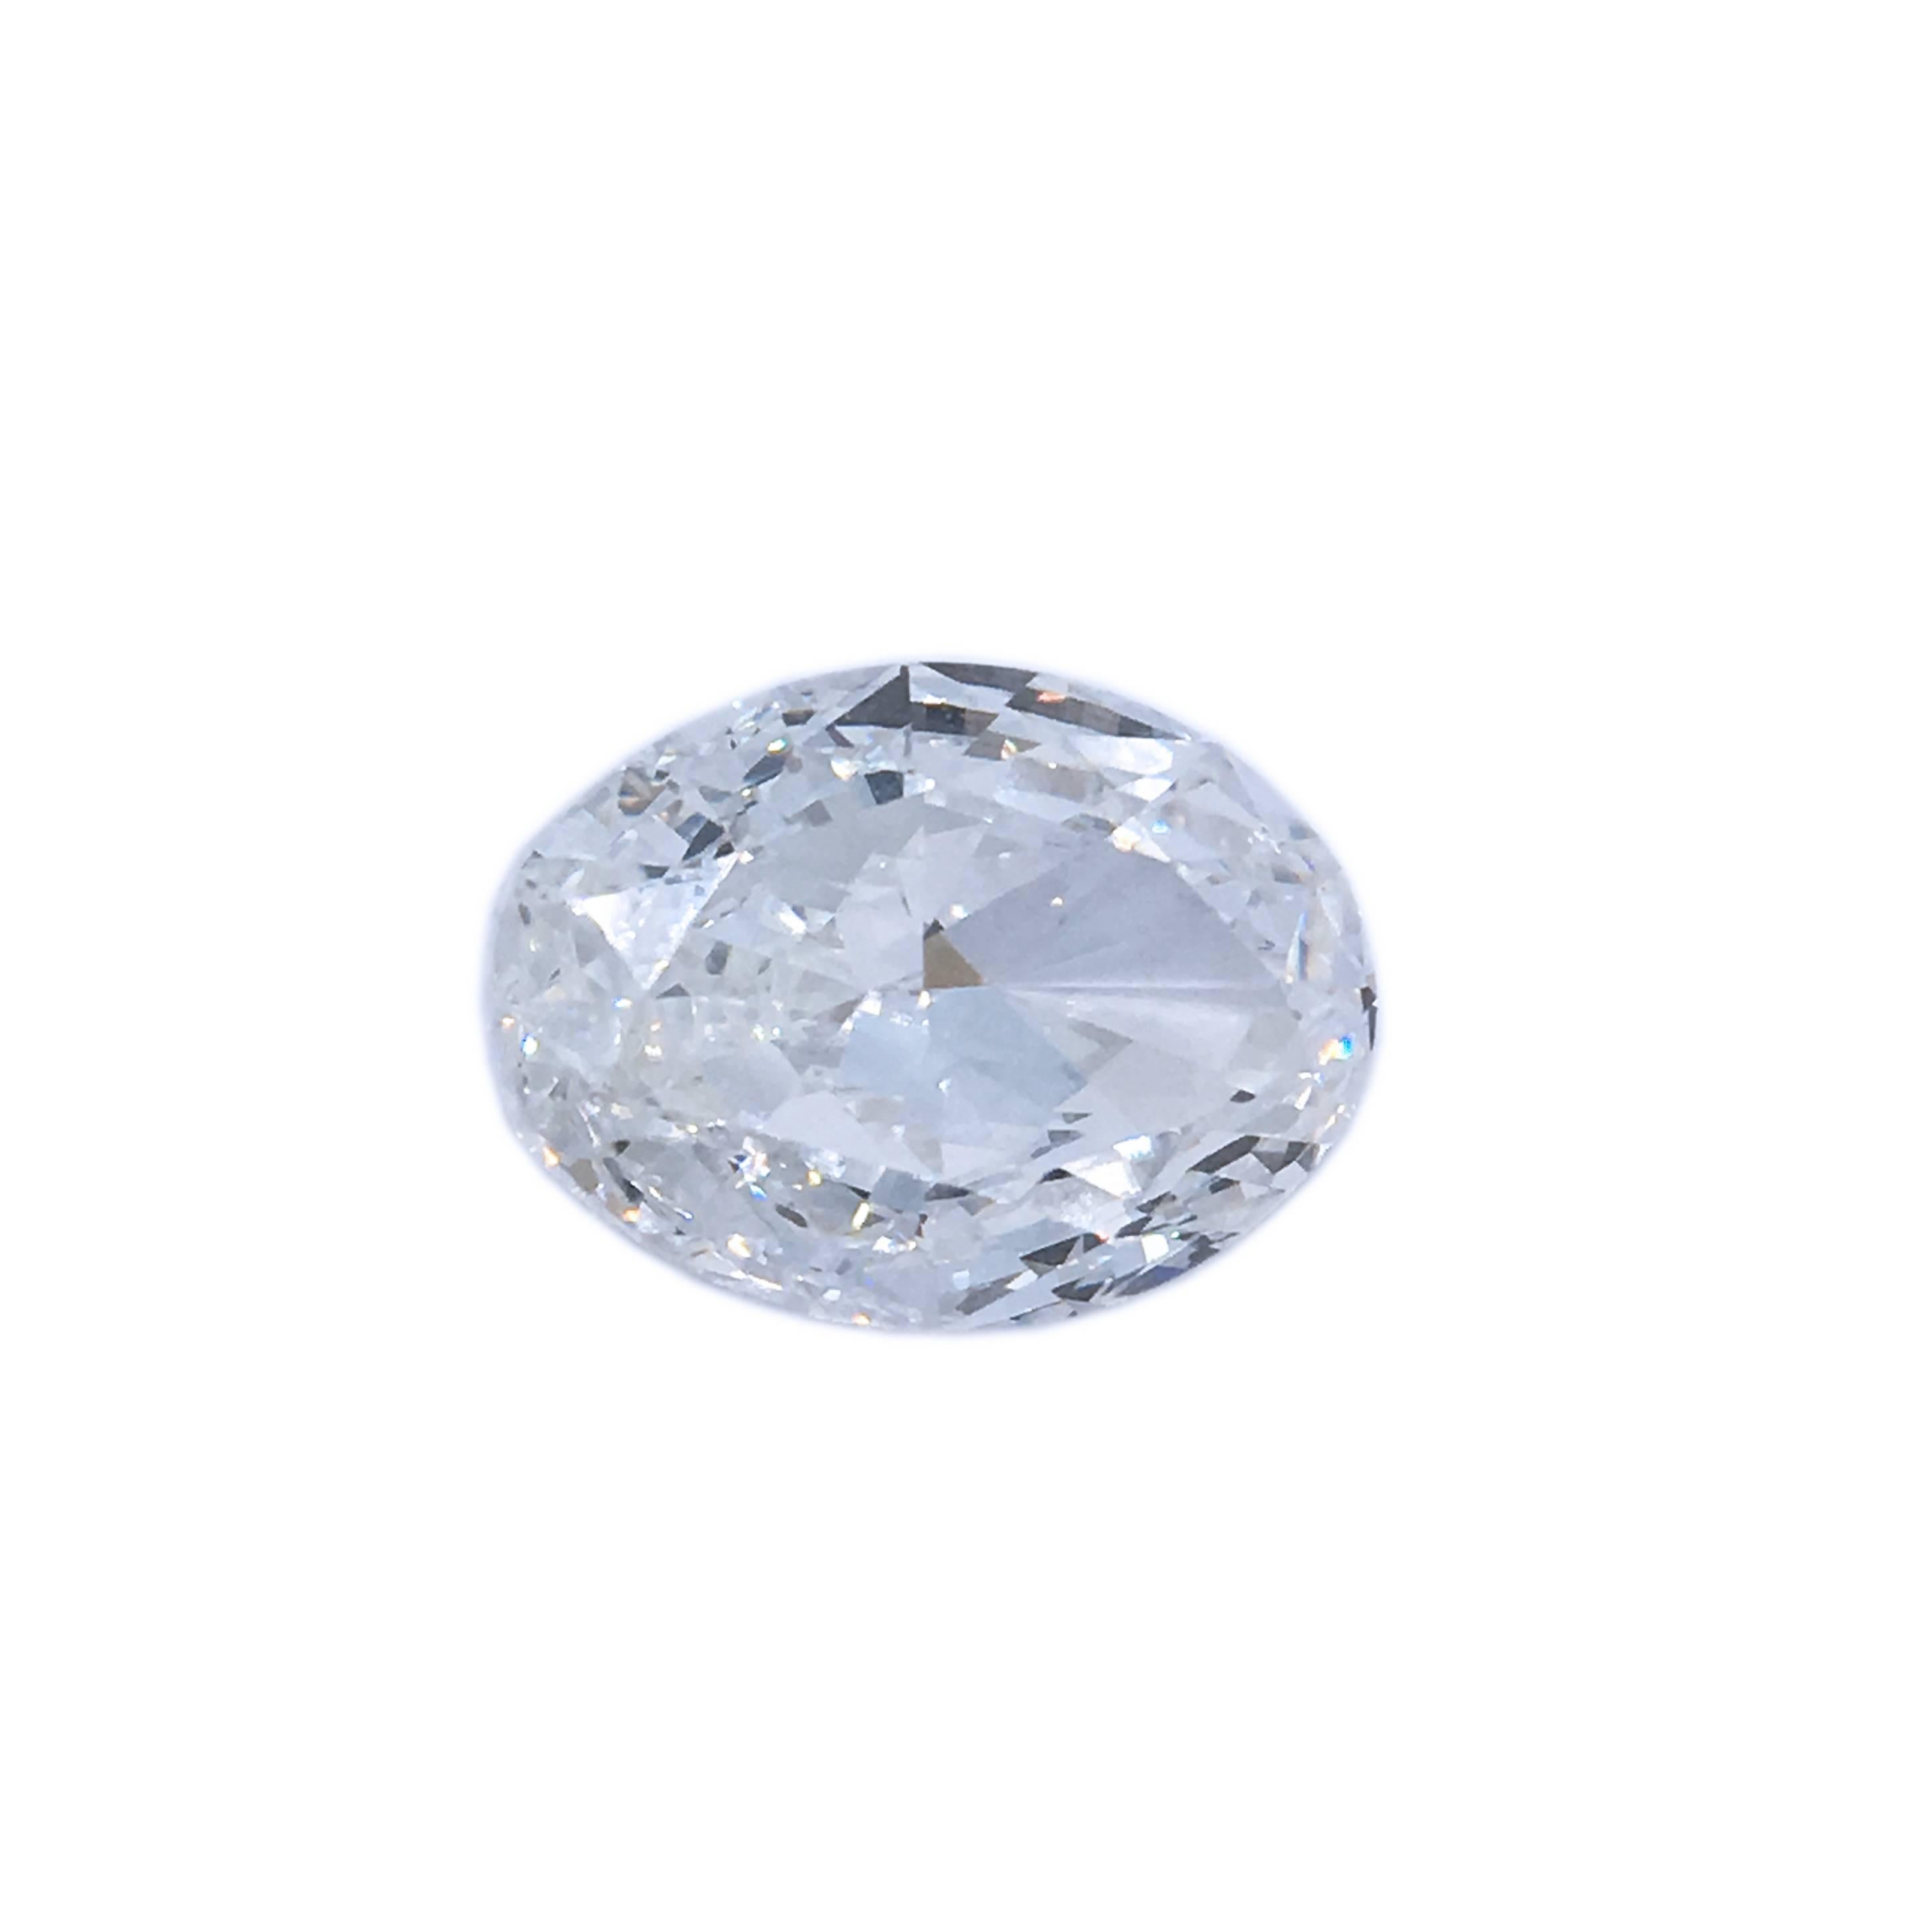 We are pleased to present this natural 5.01 Carat Oval Cut White Diamond in excellent, perfect conditions: this stone has been certified by HRD Antwerpen as H(white) Color,  Internally Flawless(loupe clean) and cut is Very Good; its measures are